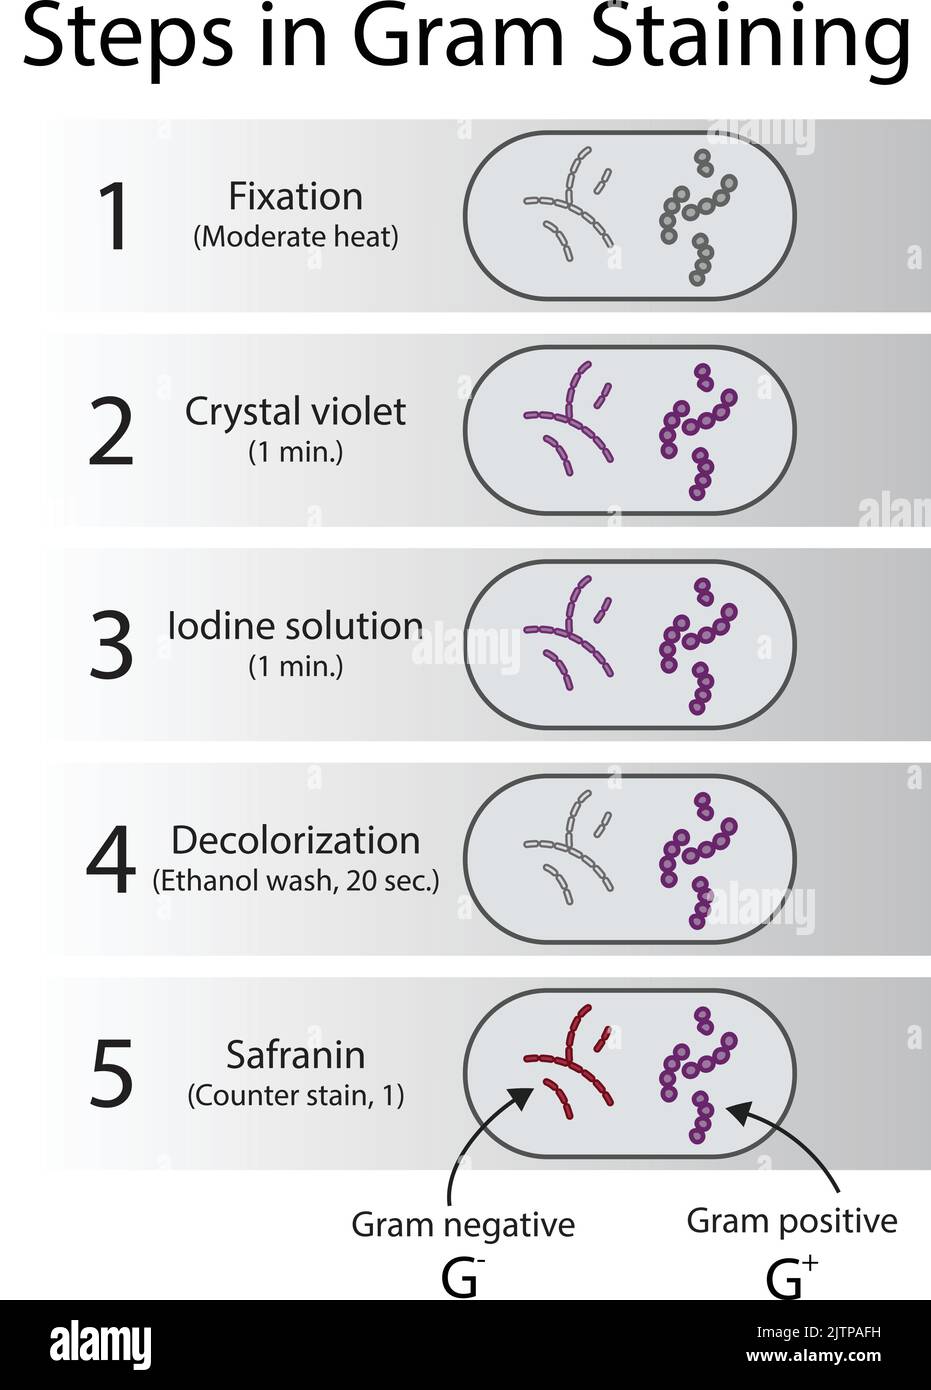 Diagram showing gram staining microbiology lab technique steps - microbiology laboratory using Crystal violet and Safranin Stock Vector